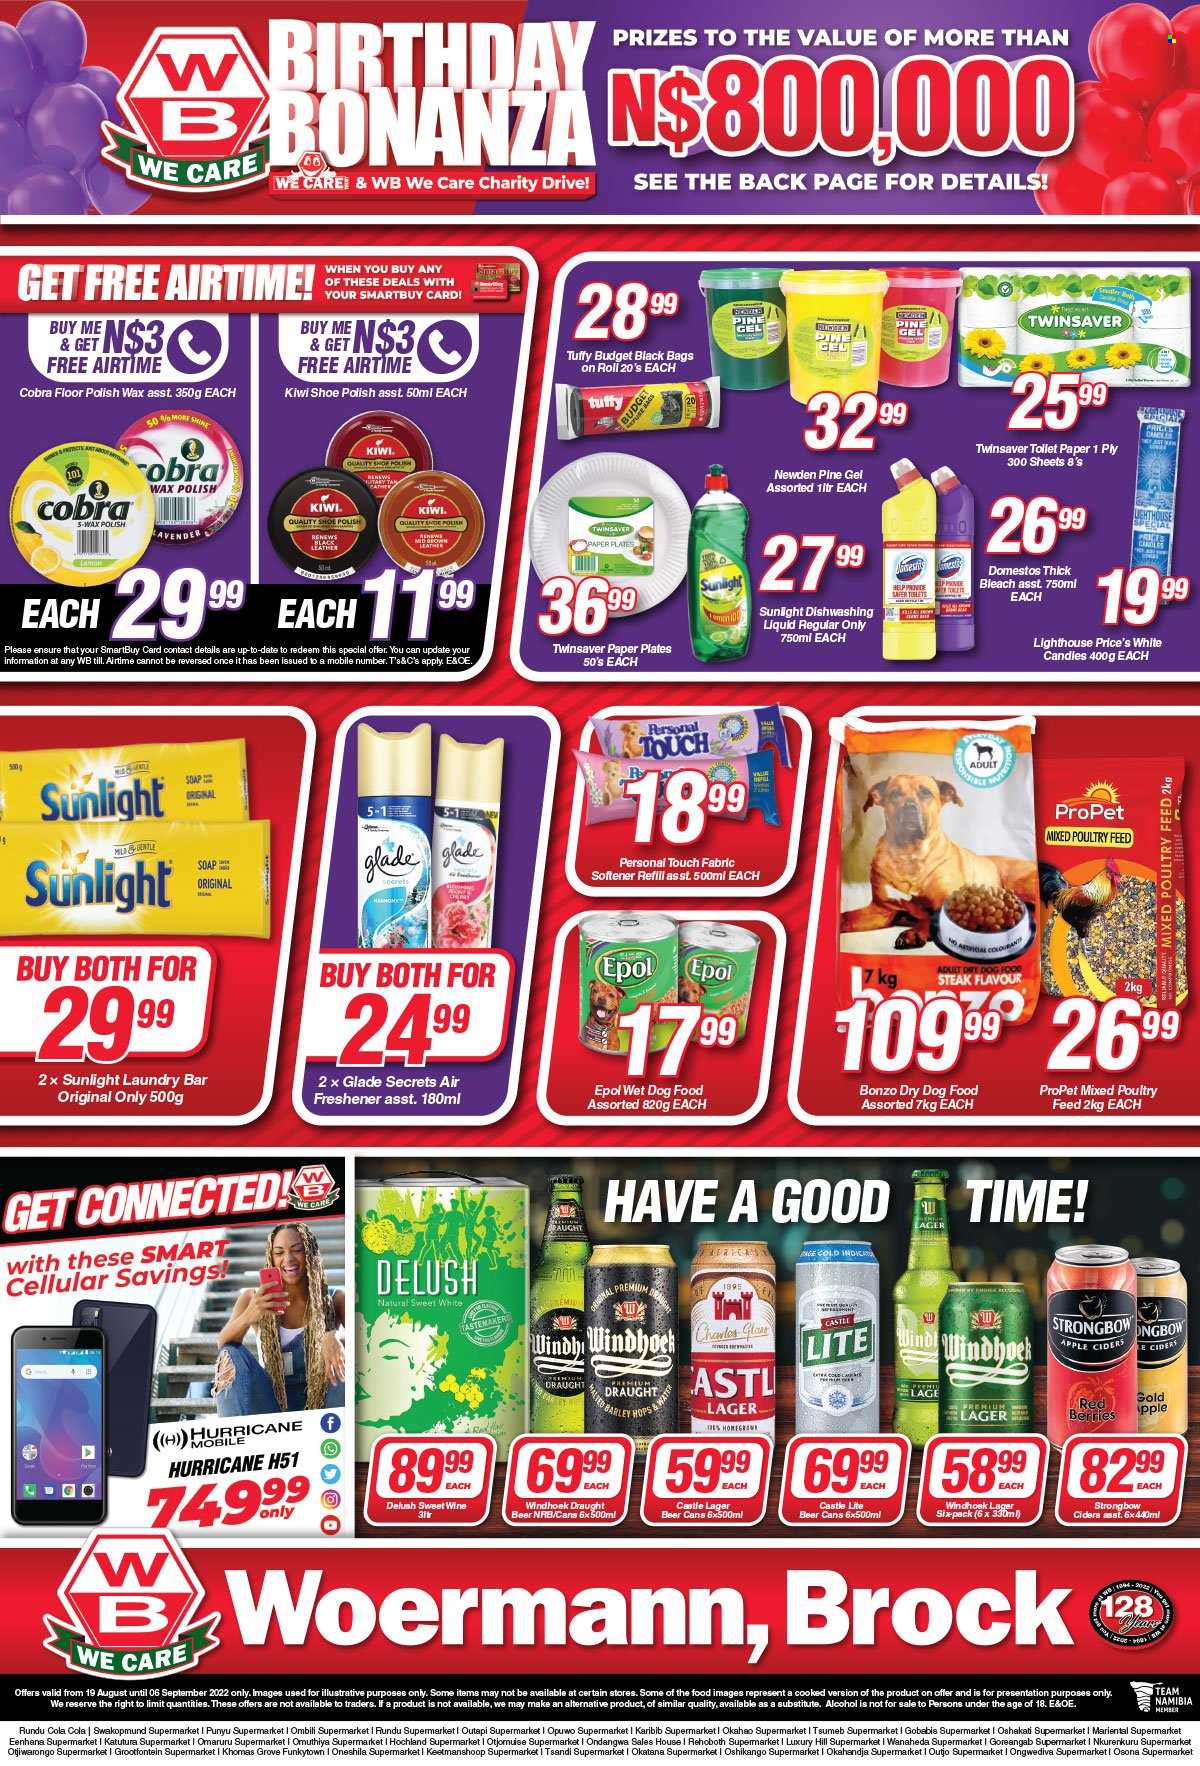 Woermann Brock catalogue  - 19/08/2022 - 06/09/2022 - Sales products - kiwi, wine, alcohol, beer, Castle, Lager, steak, toilet paper, Domestos, bleach, fabric softener, thick bleach, softener refill, laundry soap bar, Sunlight, dishwashing liquid, soap, animal food, dog food, wet dog food, dry dog food. Page 7.